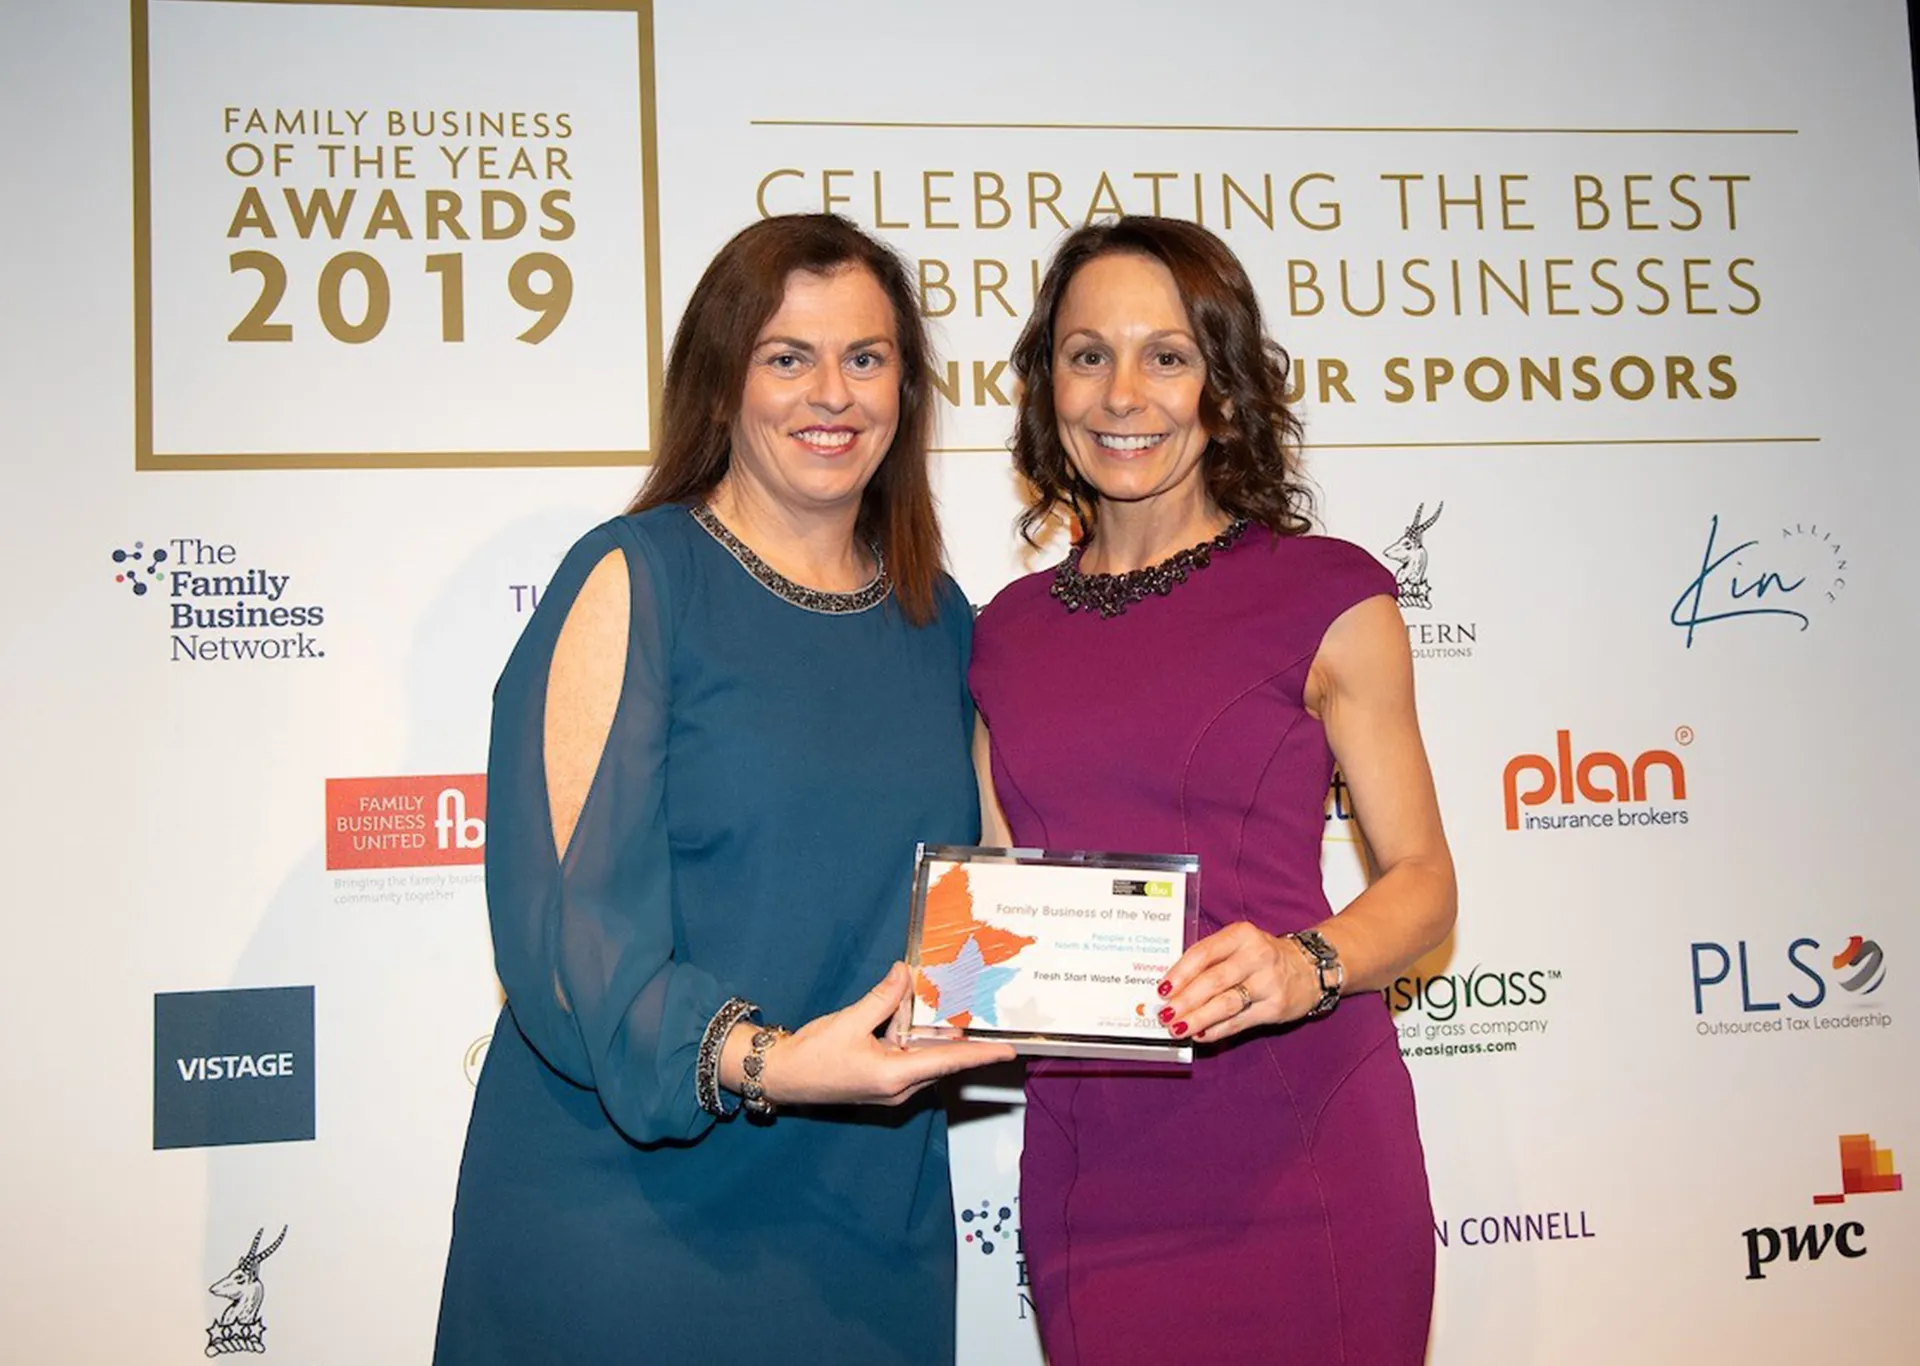 2019 family business of the year